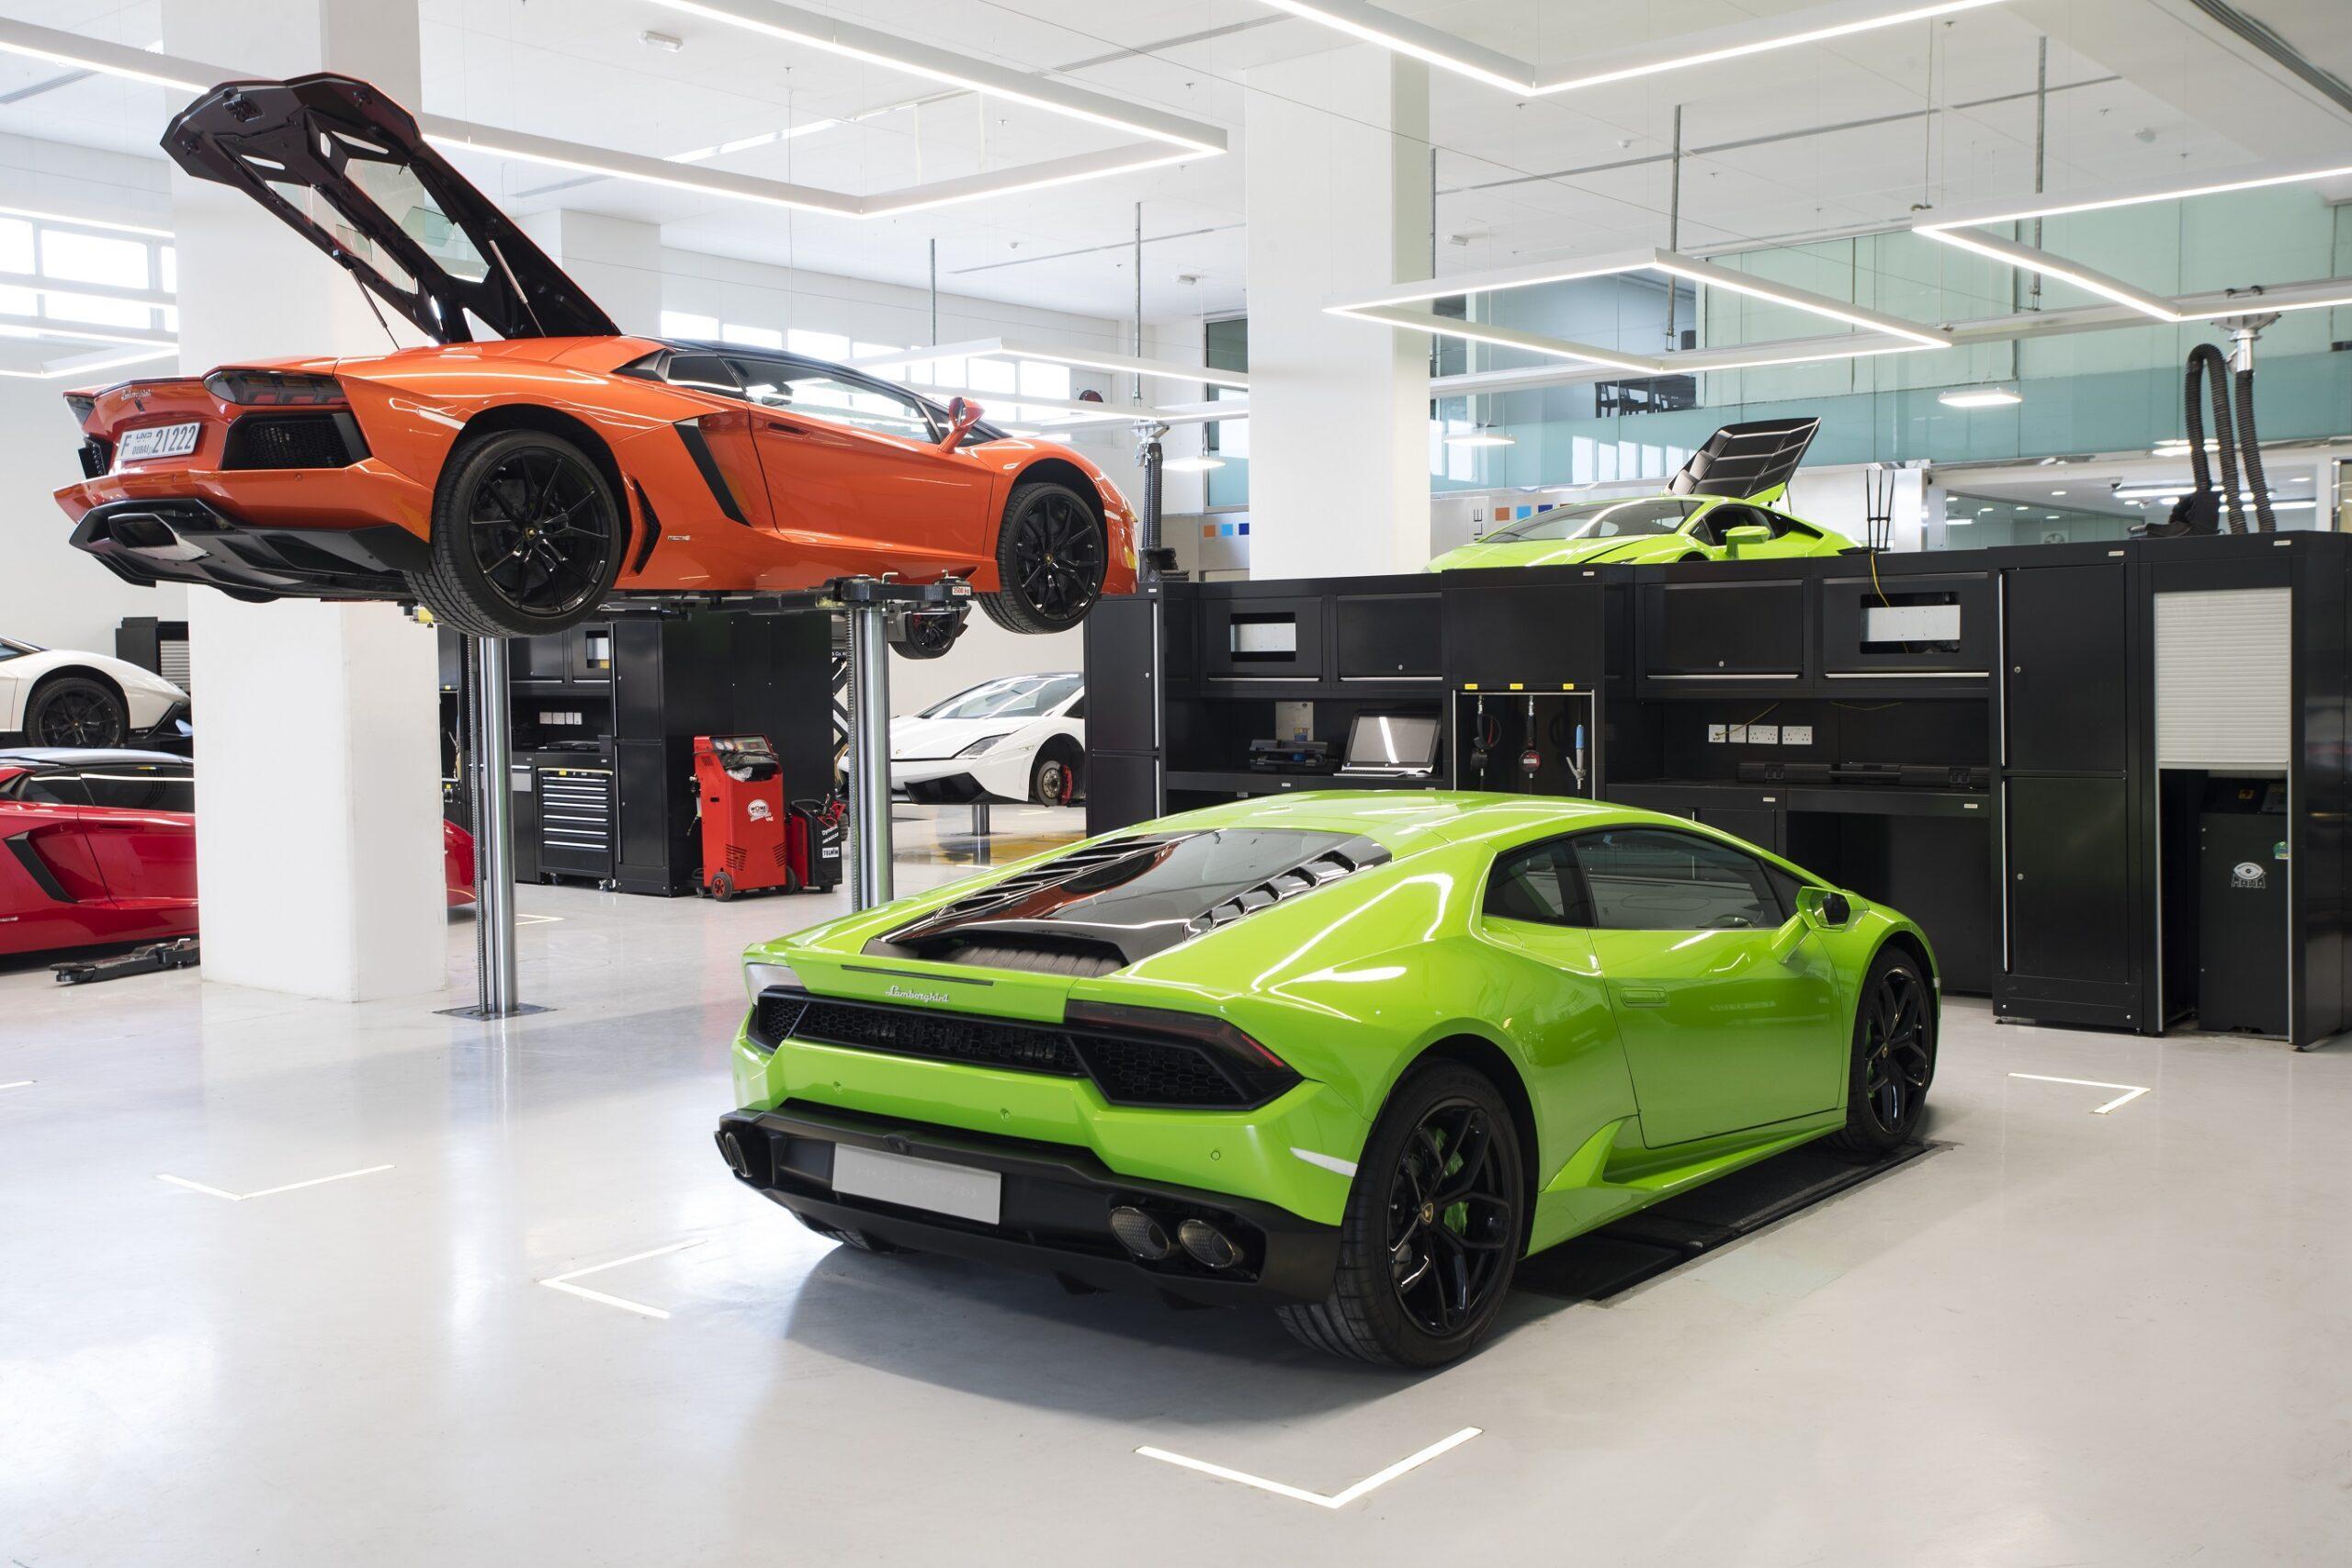 Supercar maintenance: how much does it cost?  We have the official data